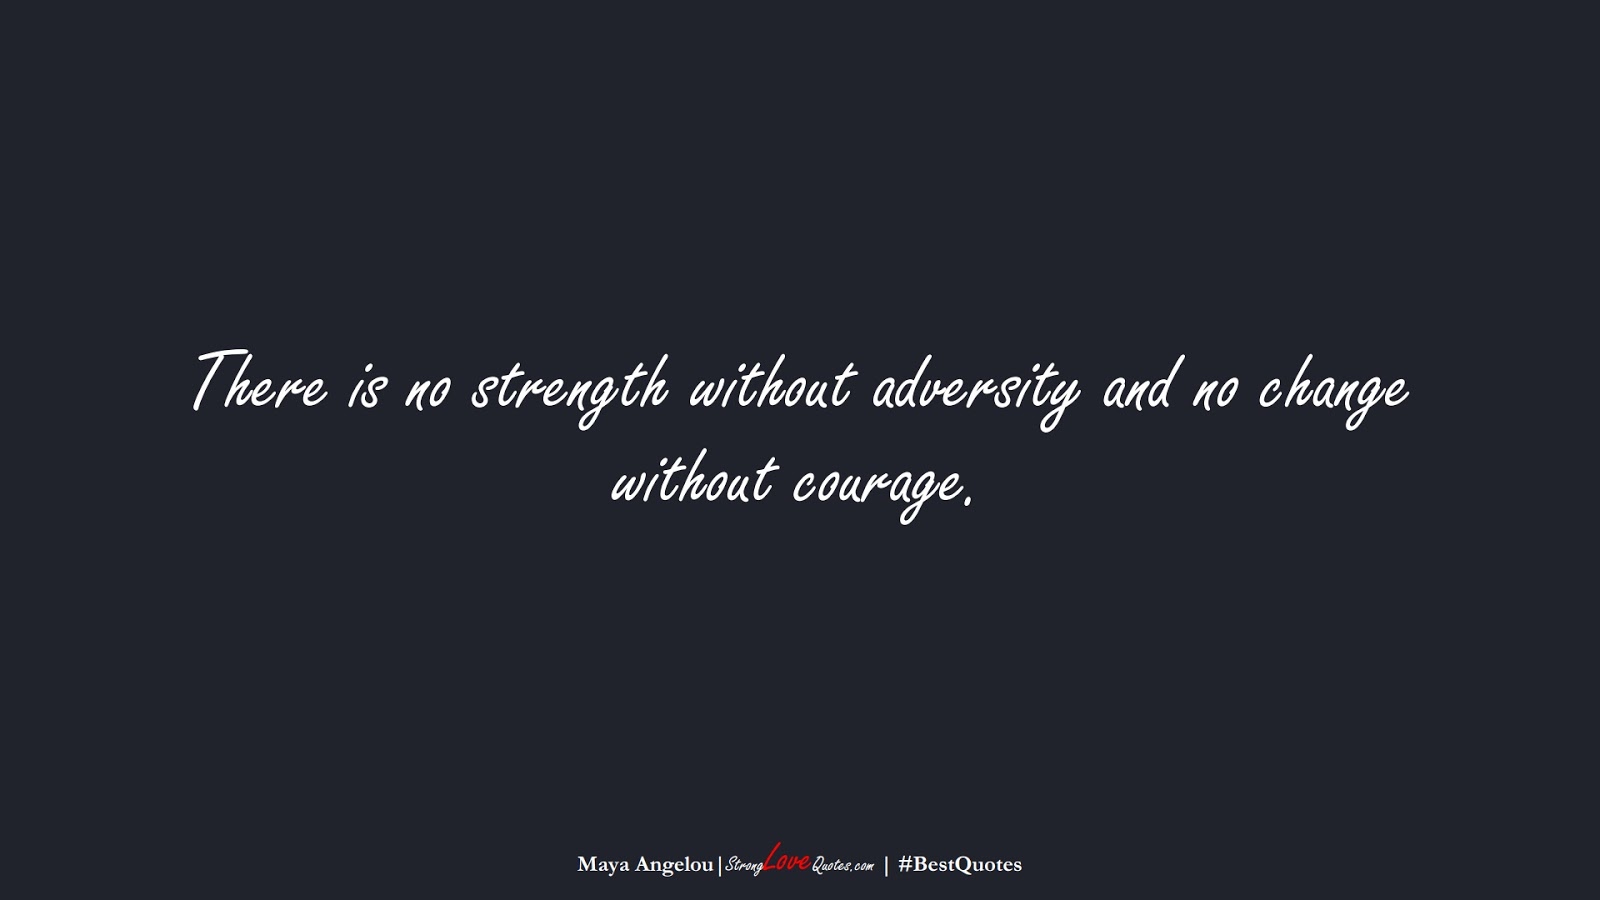 There is no strength without adversity and no change without courage. (Maya Angelou);  #BestQuotes